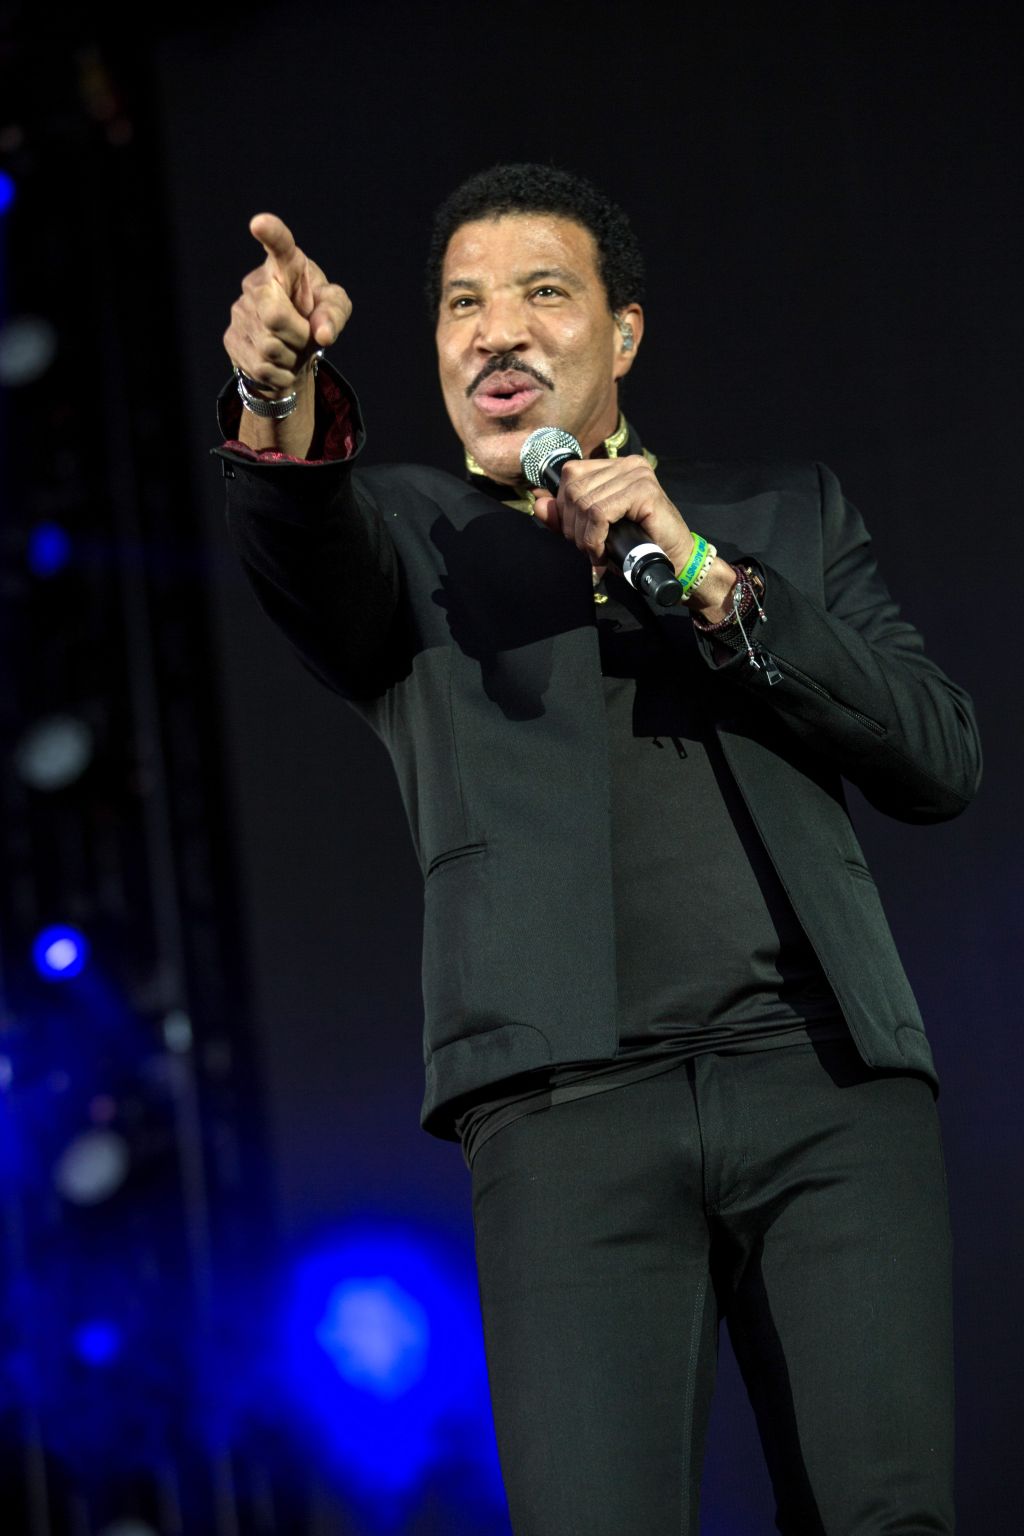 Lionel Richie Performs In Swansea